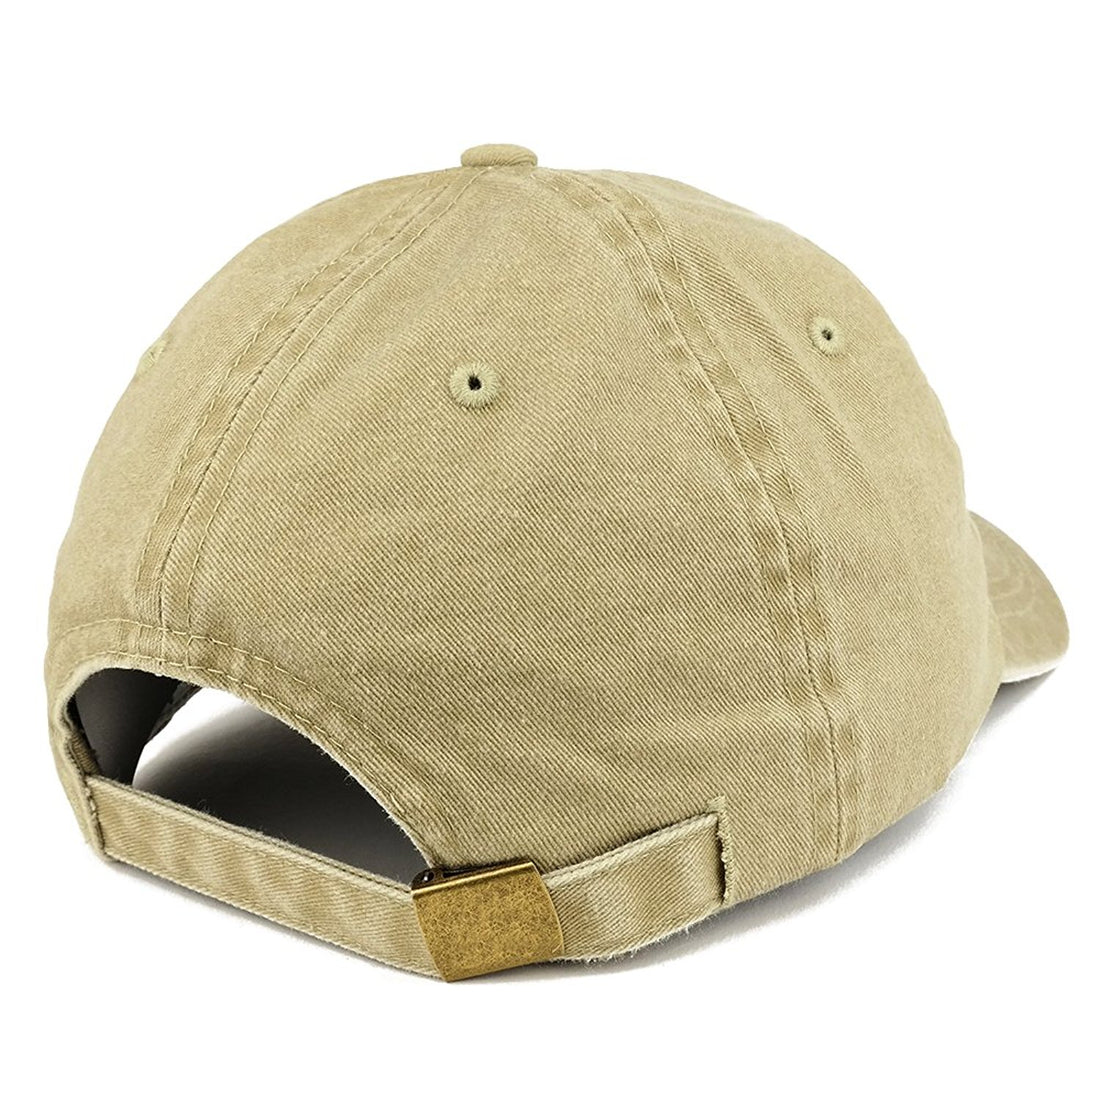 Trendy Apparel Shop Established 1961 Embroidered 58th Birthday Gift Pigment Dyed Washed Cotton Cap